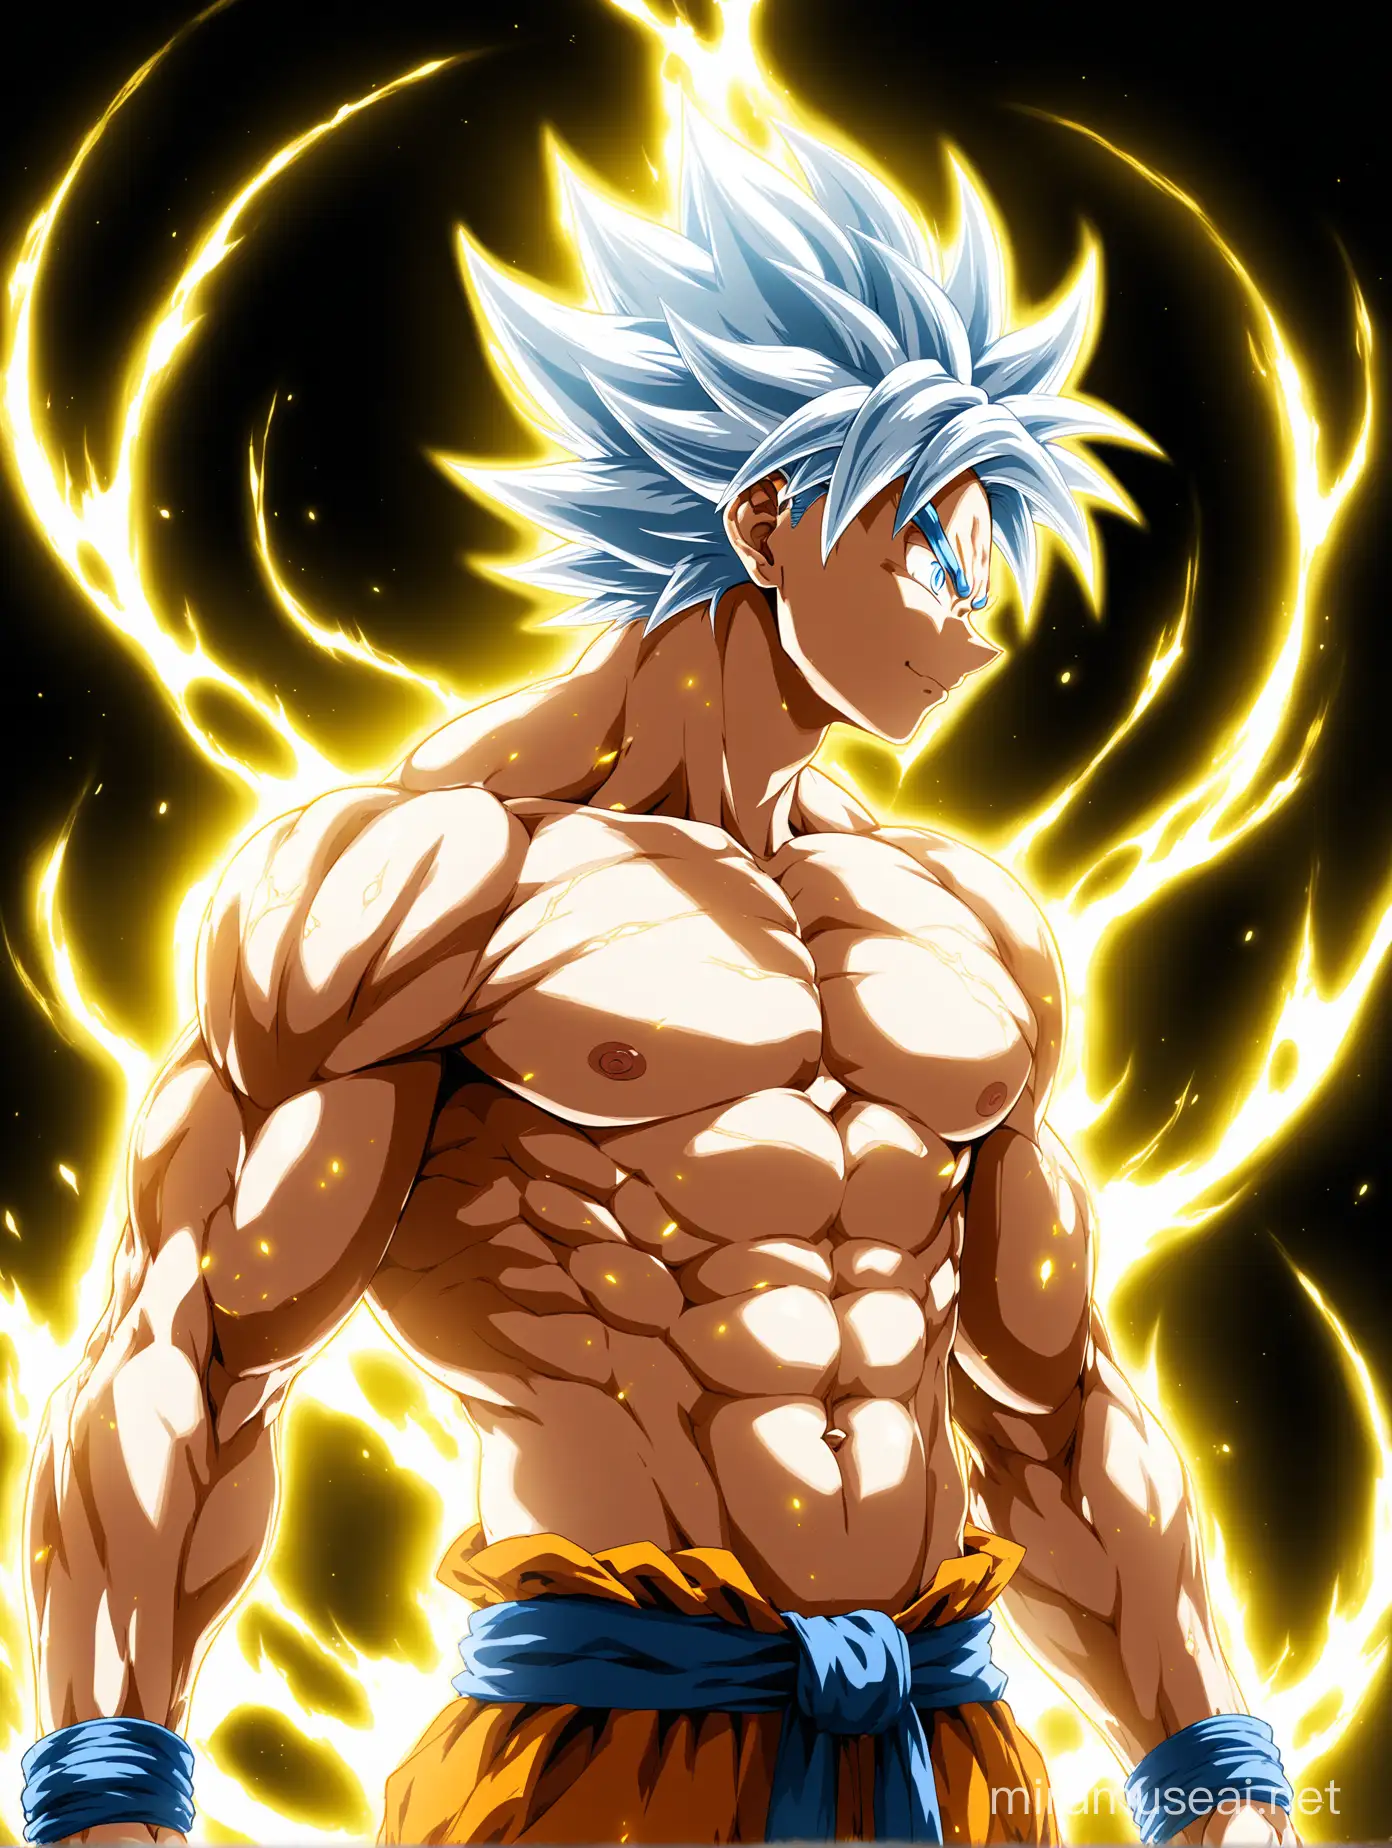 Shirtless Goku With a new white-yellow transformation with strong ultra white-yellow lighting aura, he's lean and vascular, he has white hair only no other colors, side view